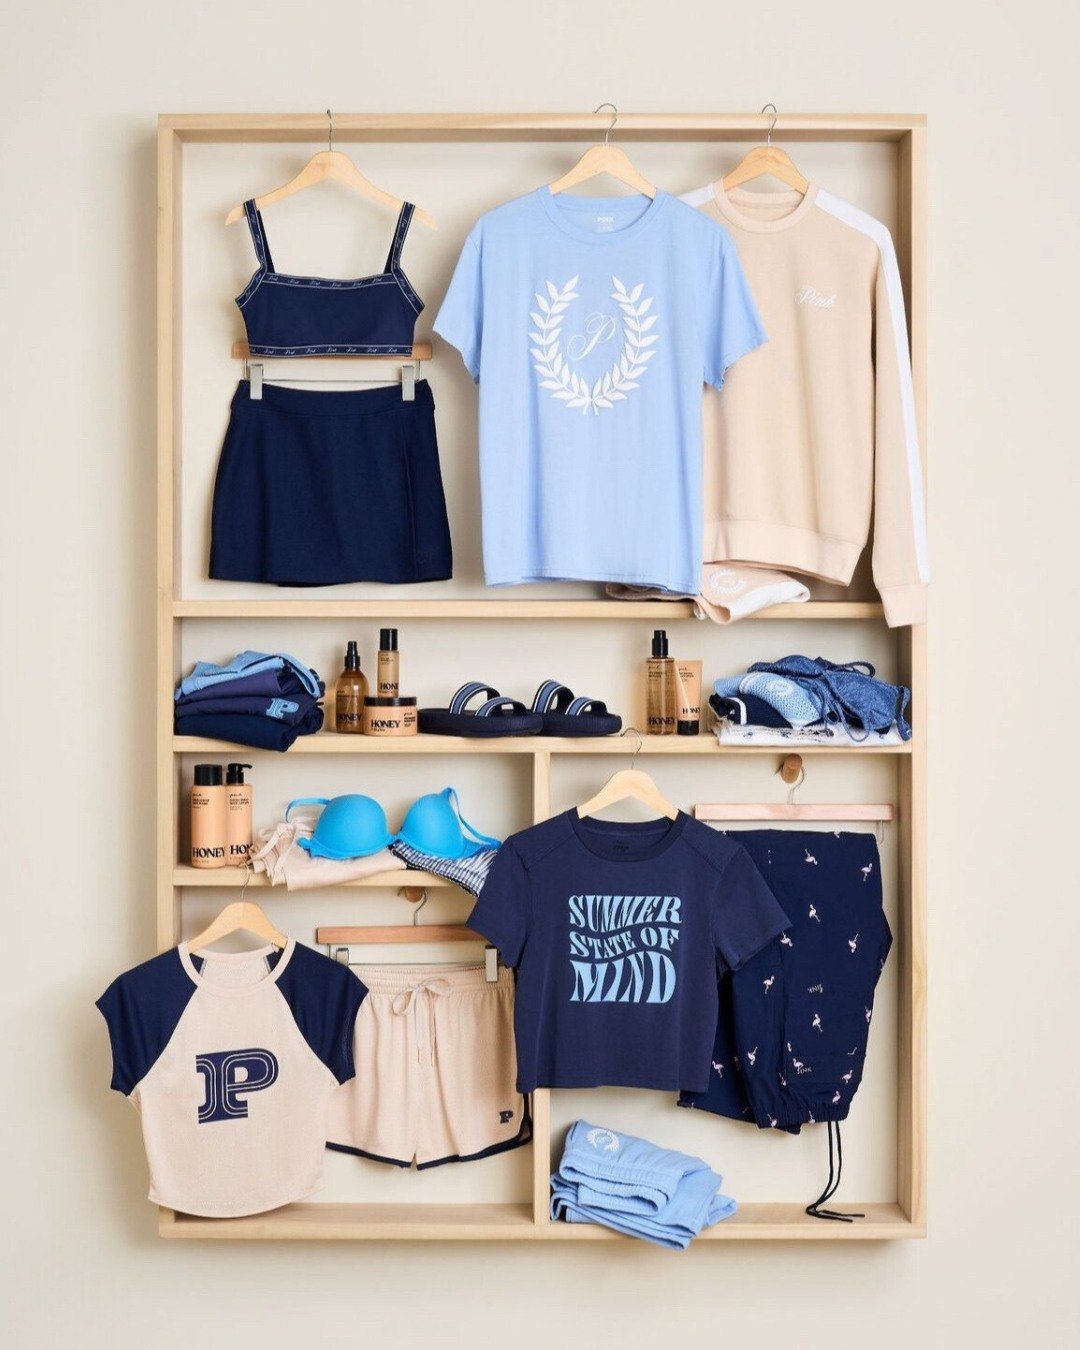 💙 Embrace the season with all the shades of blue in @vspink new spring arrivals! 💐
From soft pastels to bold hues, they've got the perfect styles to freshen up your wardrobe. ✨

Don't miss out on amazing deals happening all season long, and be sure